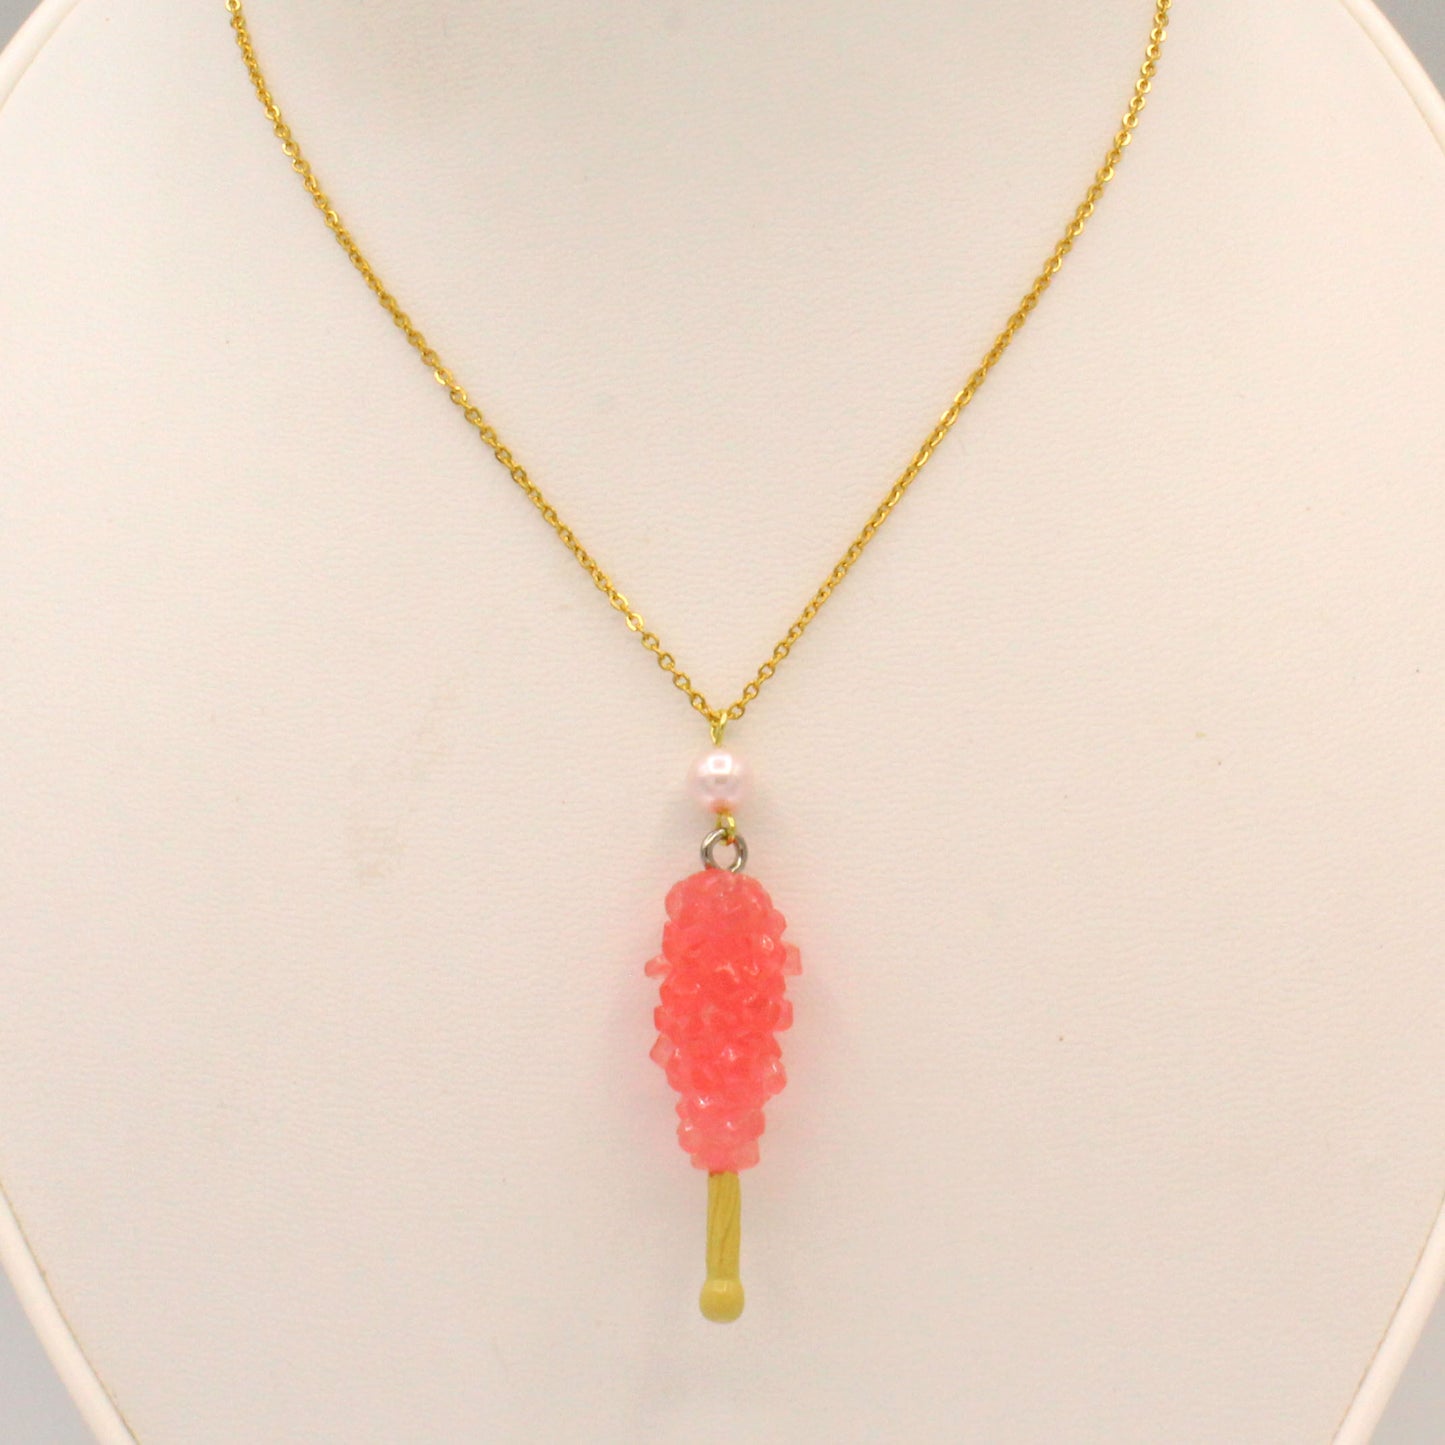 Peach Rock Candy Necklace - Special Edition